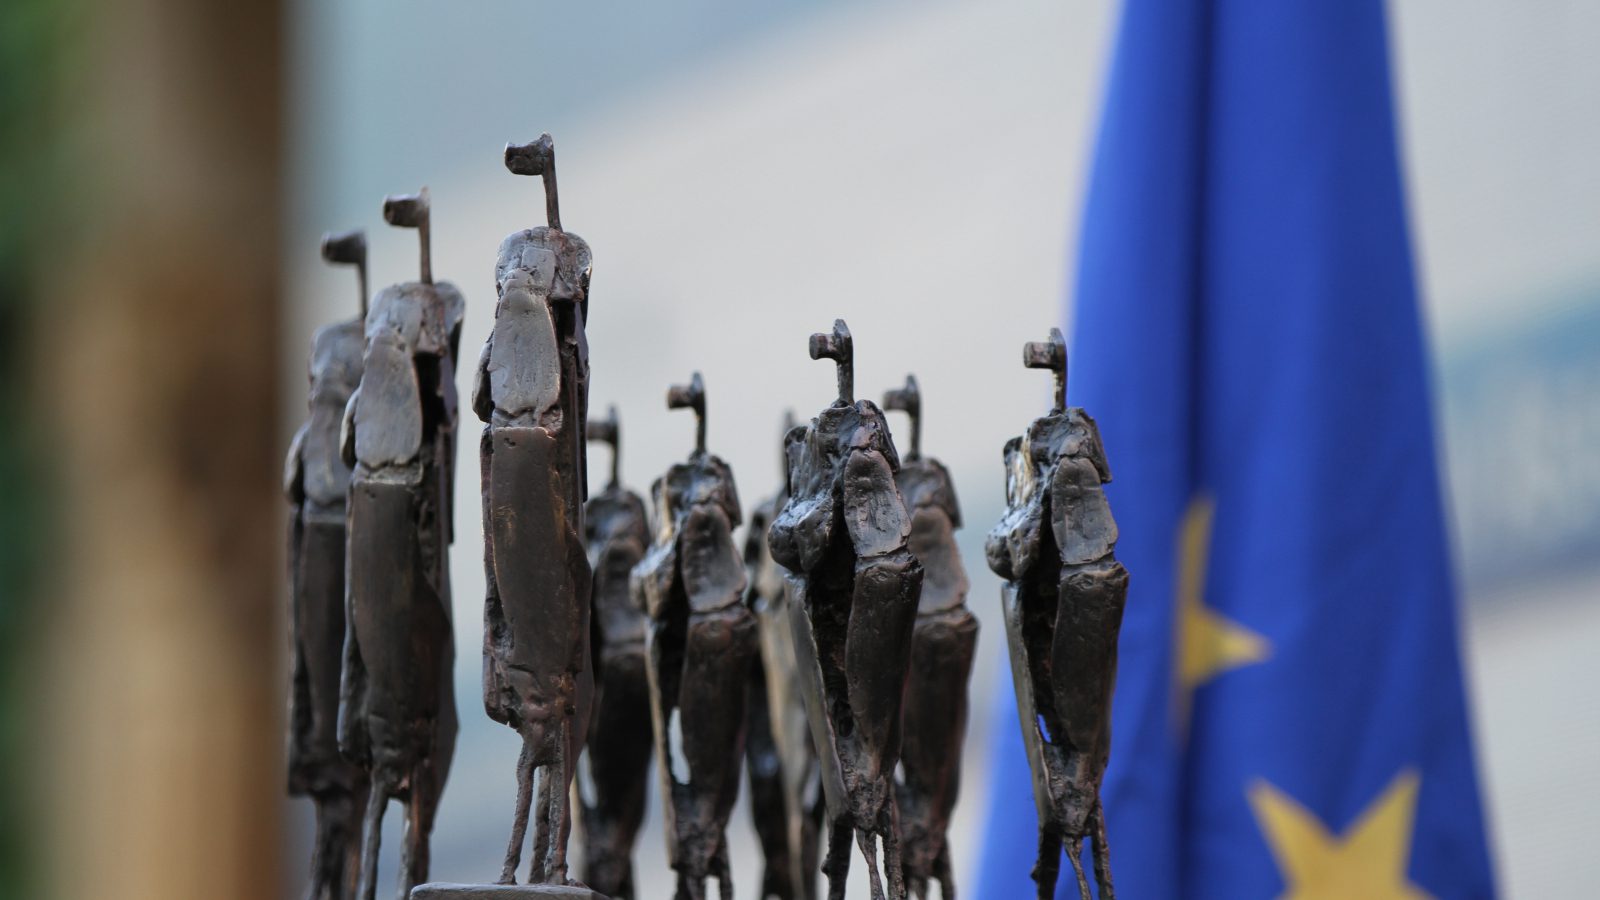 The “Samir Kassir Award for Freedom of the Press” funded by the European Union